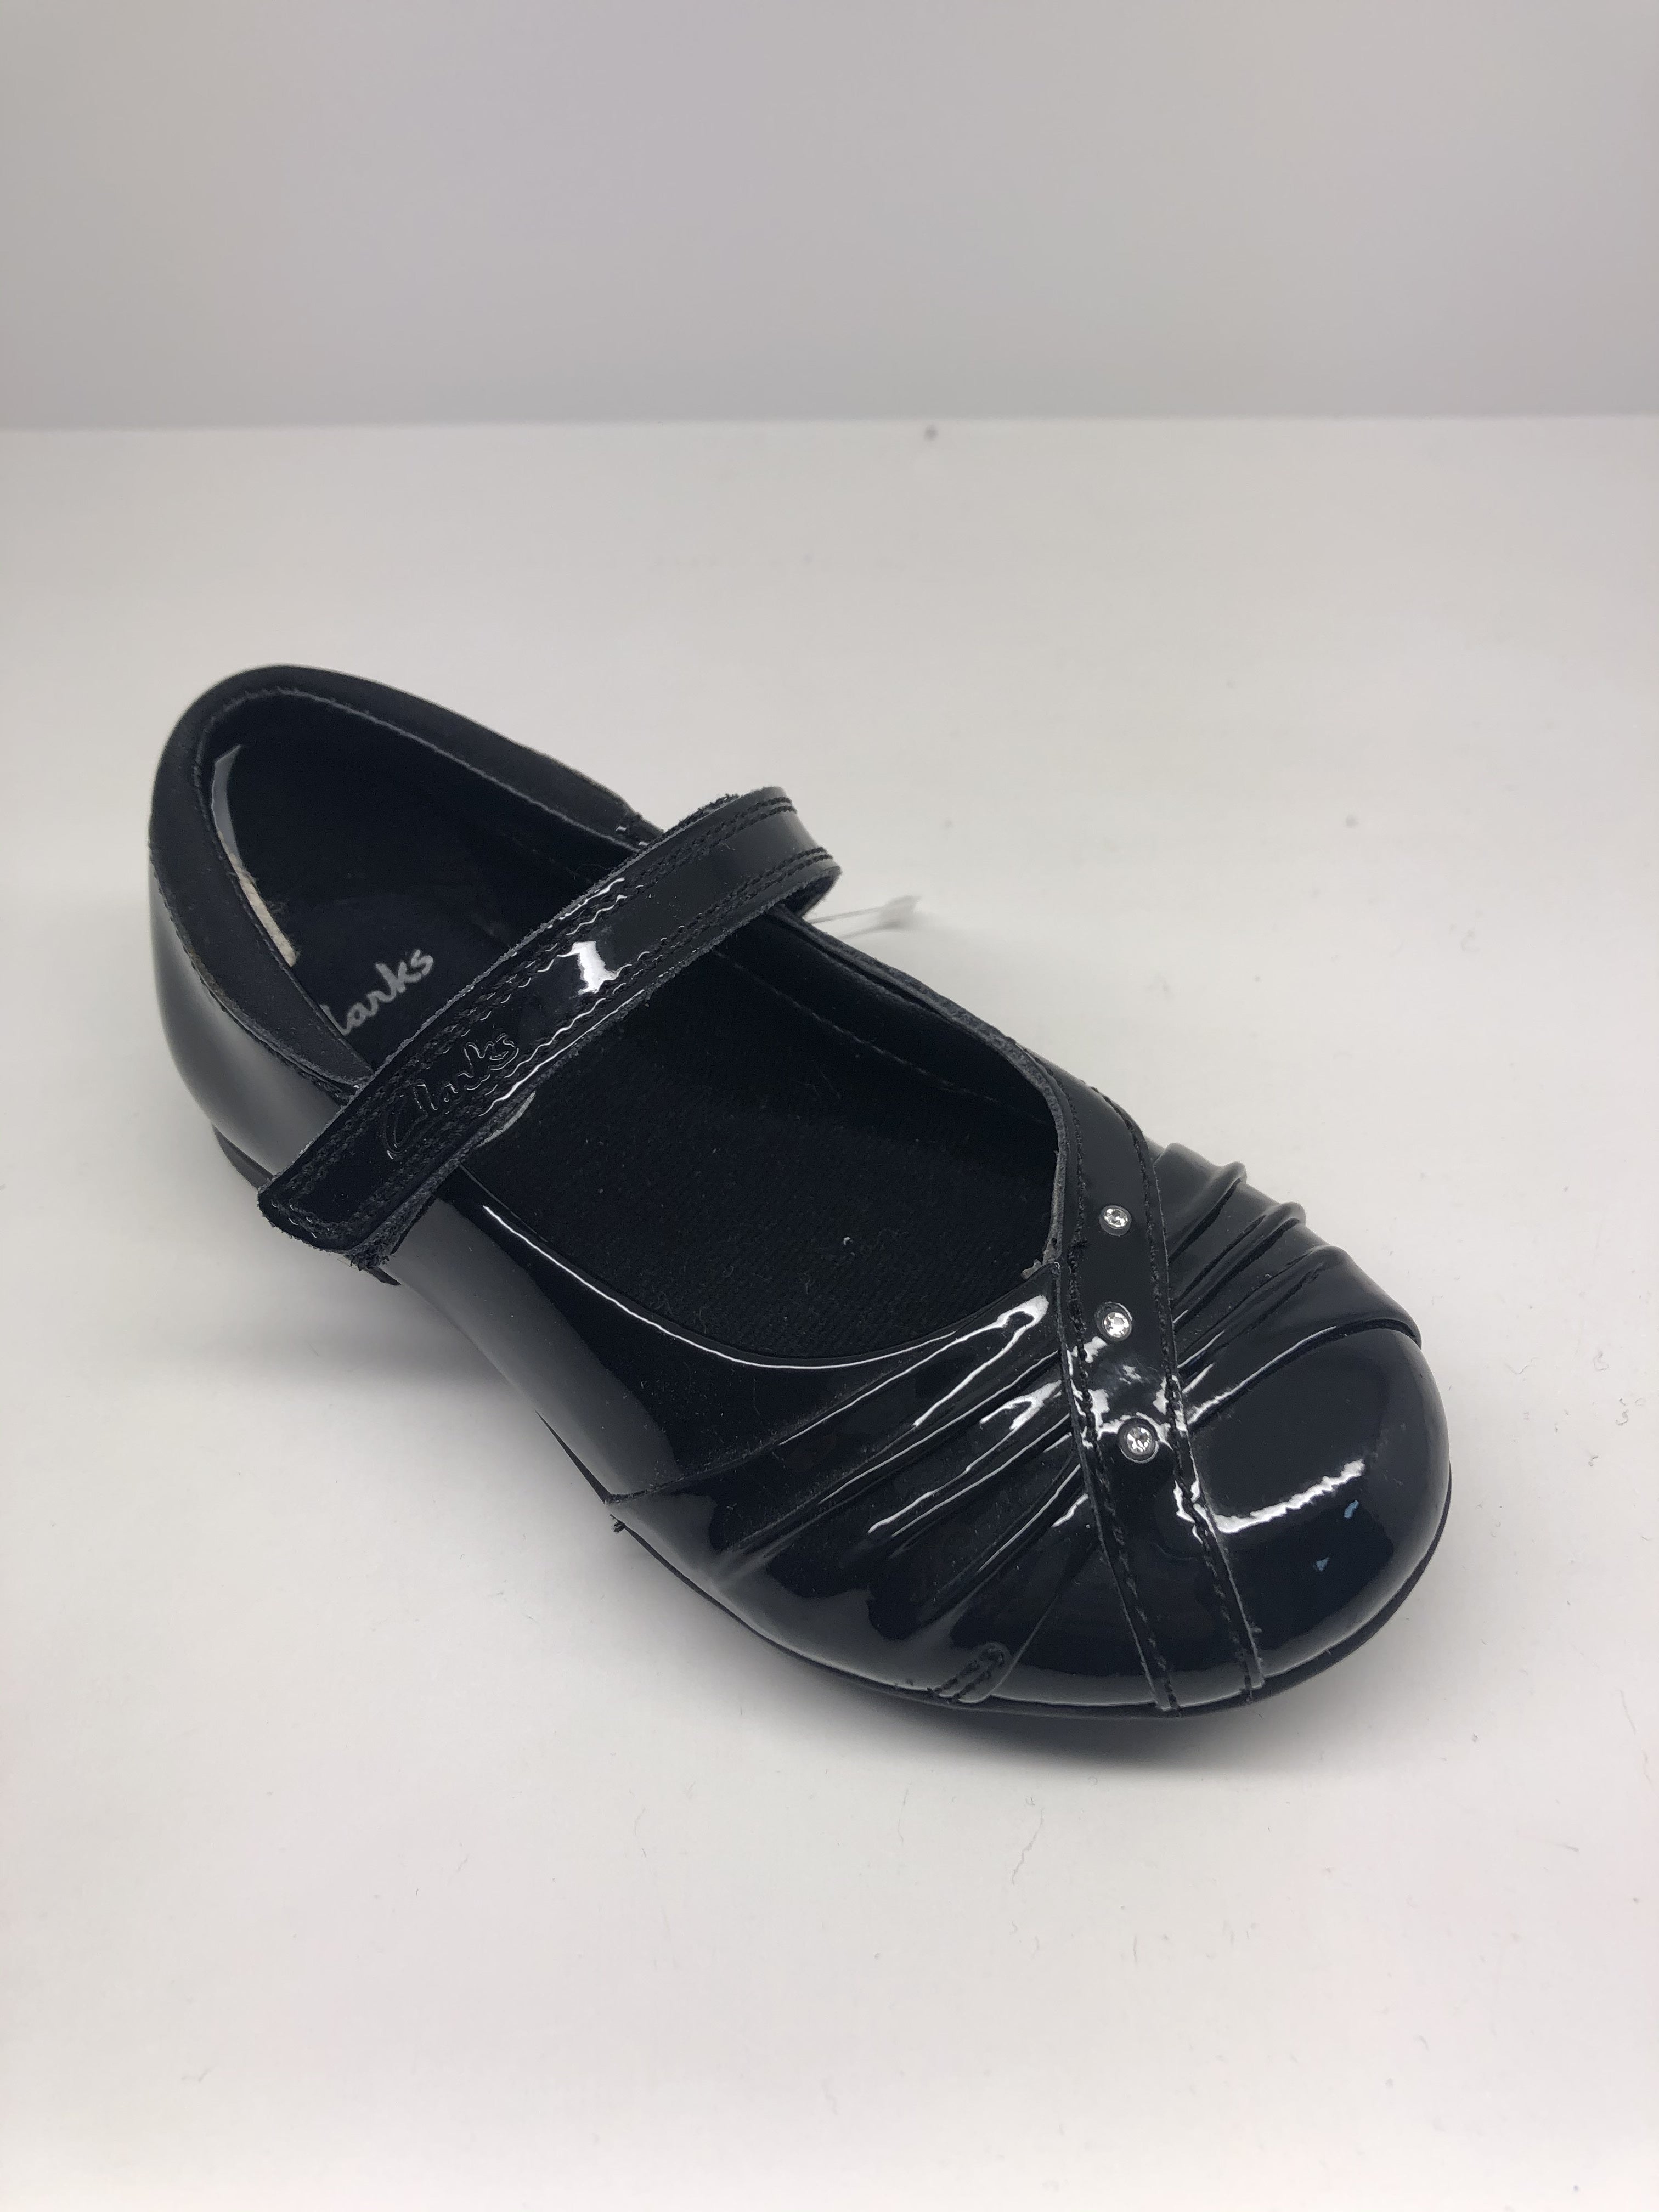 Clarks Dolly Shy Girls Black Patent Leather Shoes